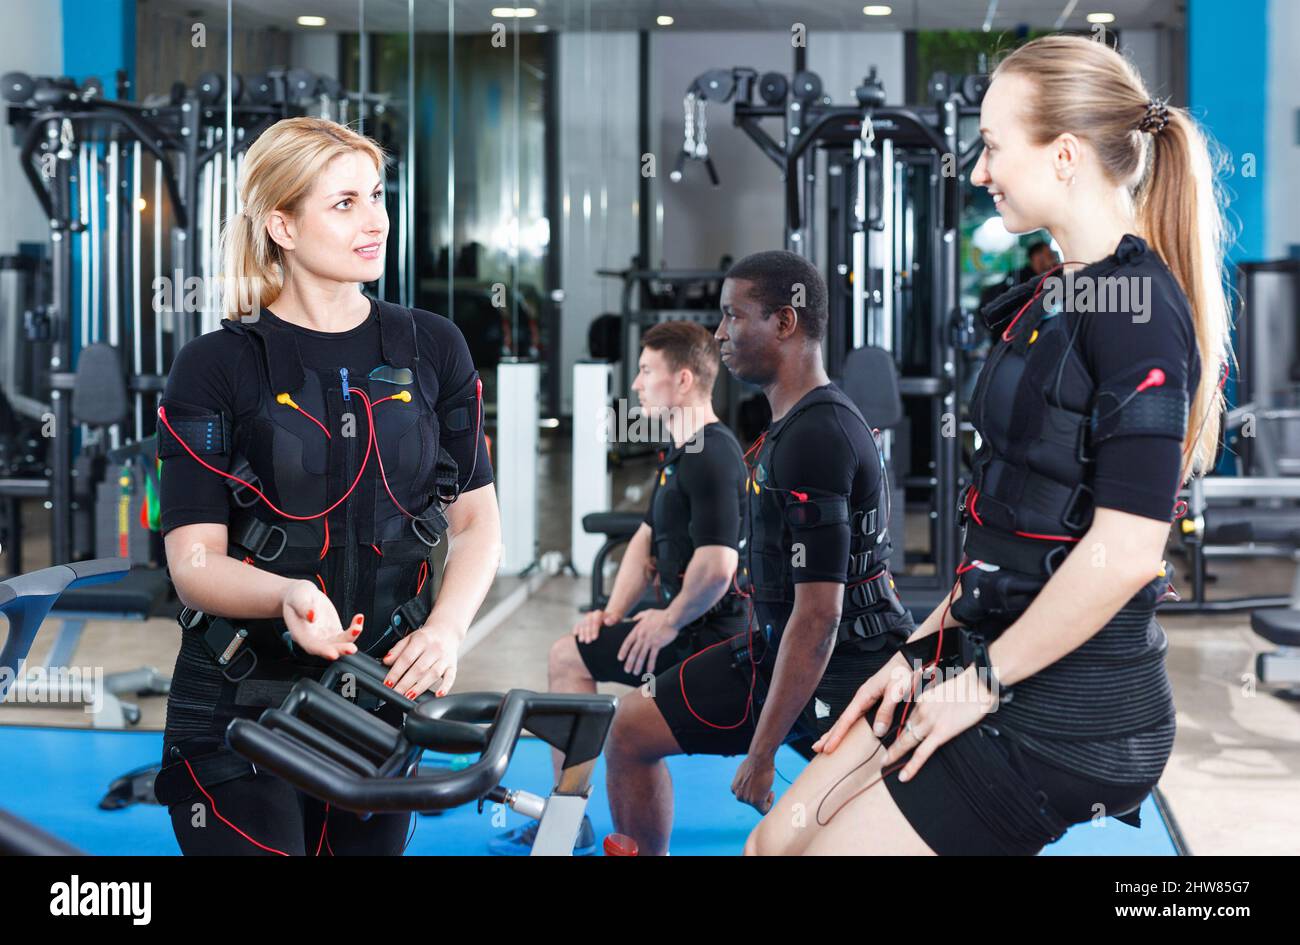 https://c8.alamy.com/comp/2HW85G7/two-fit-woman-communicating-during-electric-muscle-stimulation-workout-in-gym-2HW85G7.jpg